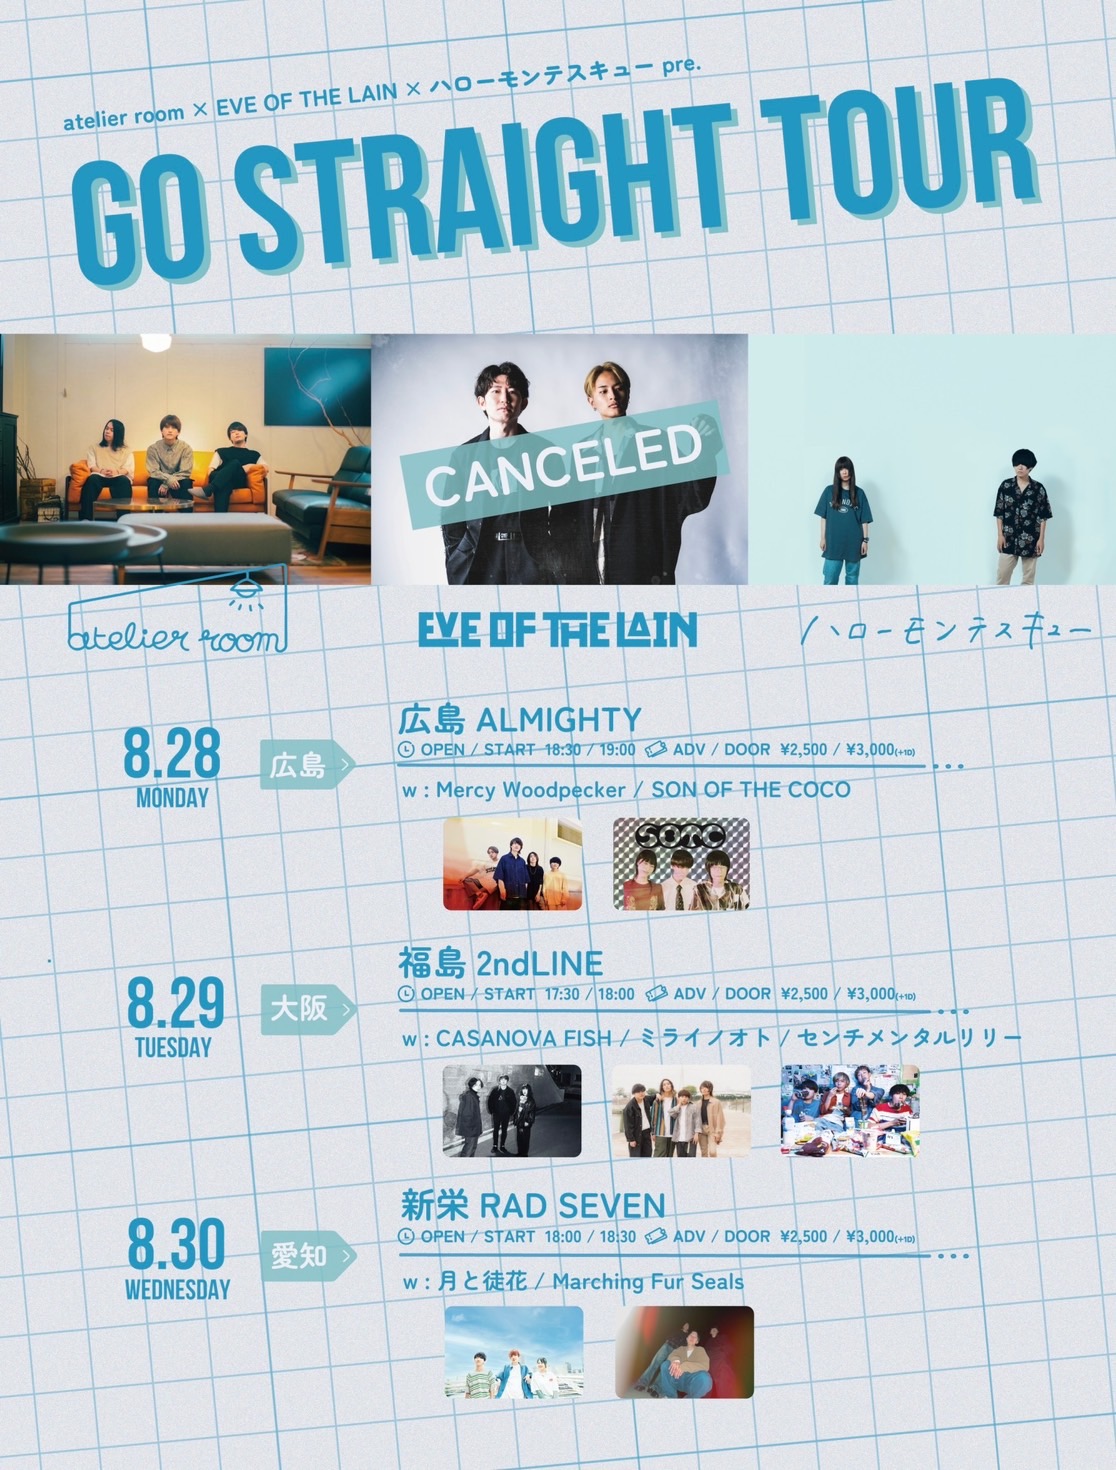 atelier room × EVE OF THE LAIN × ハローモンテスキュー pre.  『GO STRAIGHT TOUR』